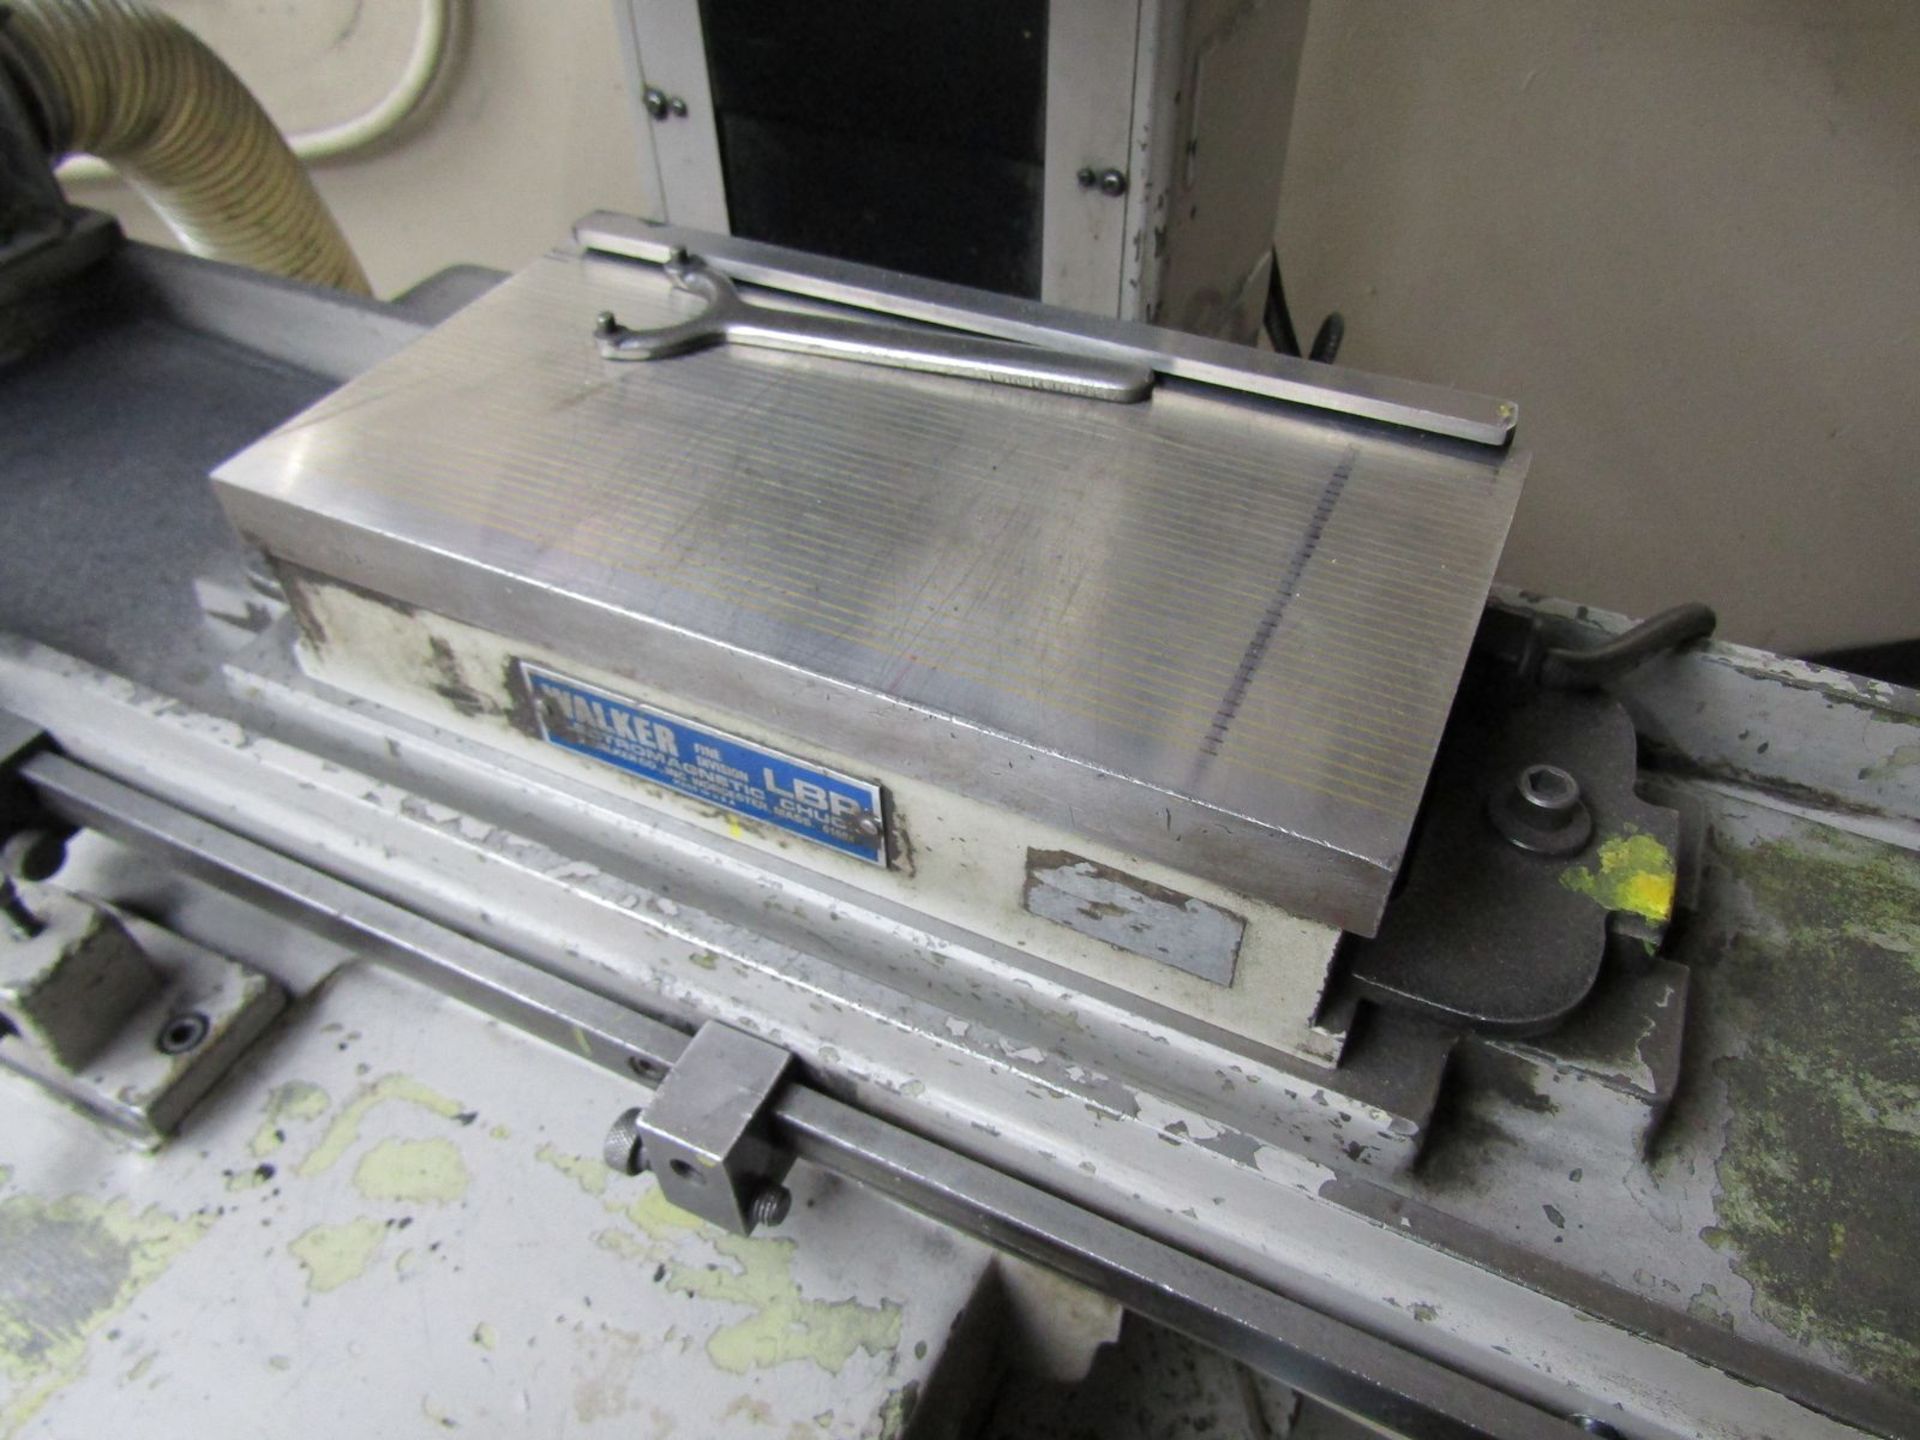 Okamoto 6 in. x 12 in. Model L6.12 Surface Grinder, S/N: 3624; with Sony Model LG10 2-Axis Digital - Image 3 of 4